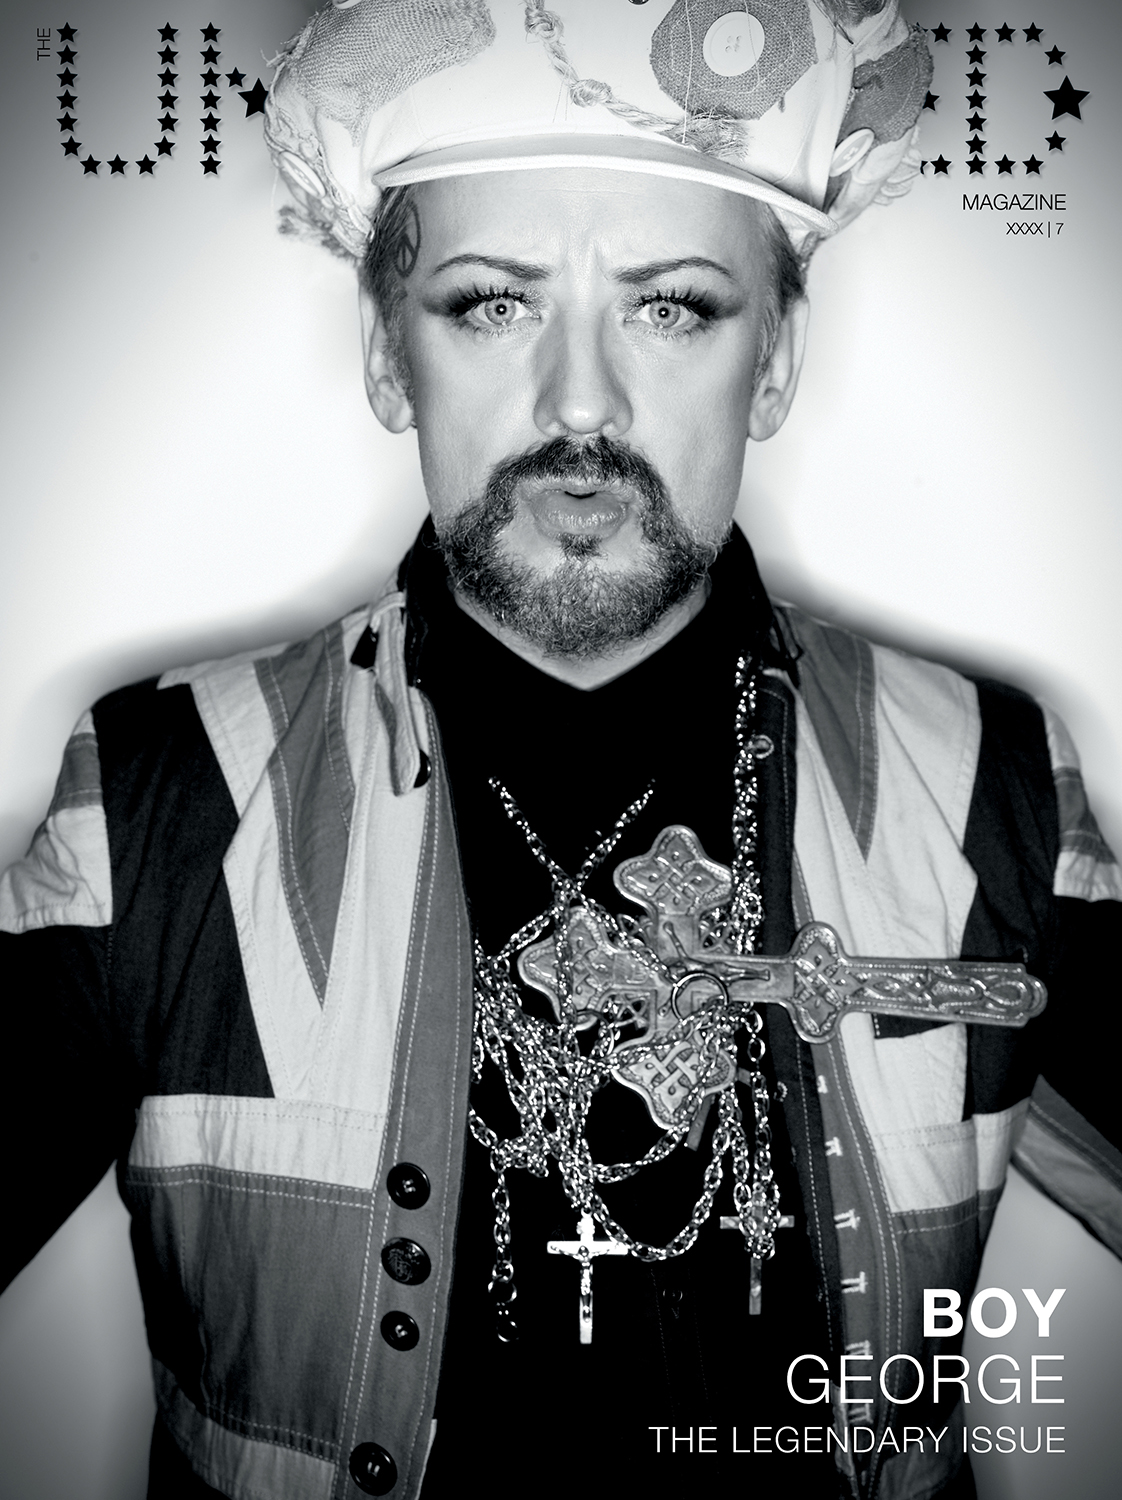 The-Untitled-Magazine-Legendary-Issue-7-low-res-Boy-George.jpg